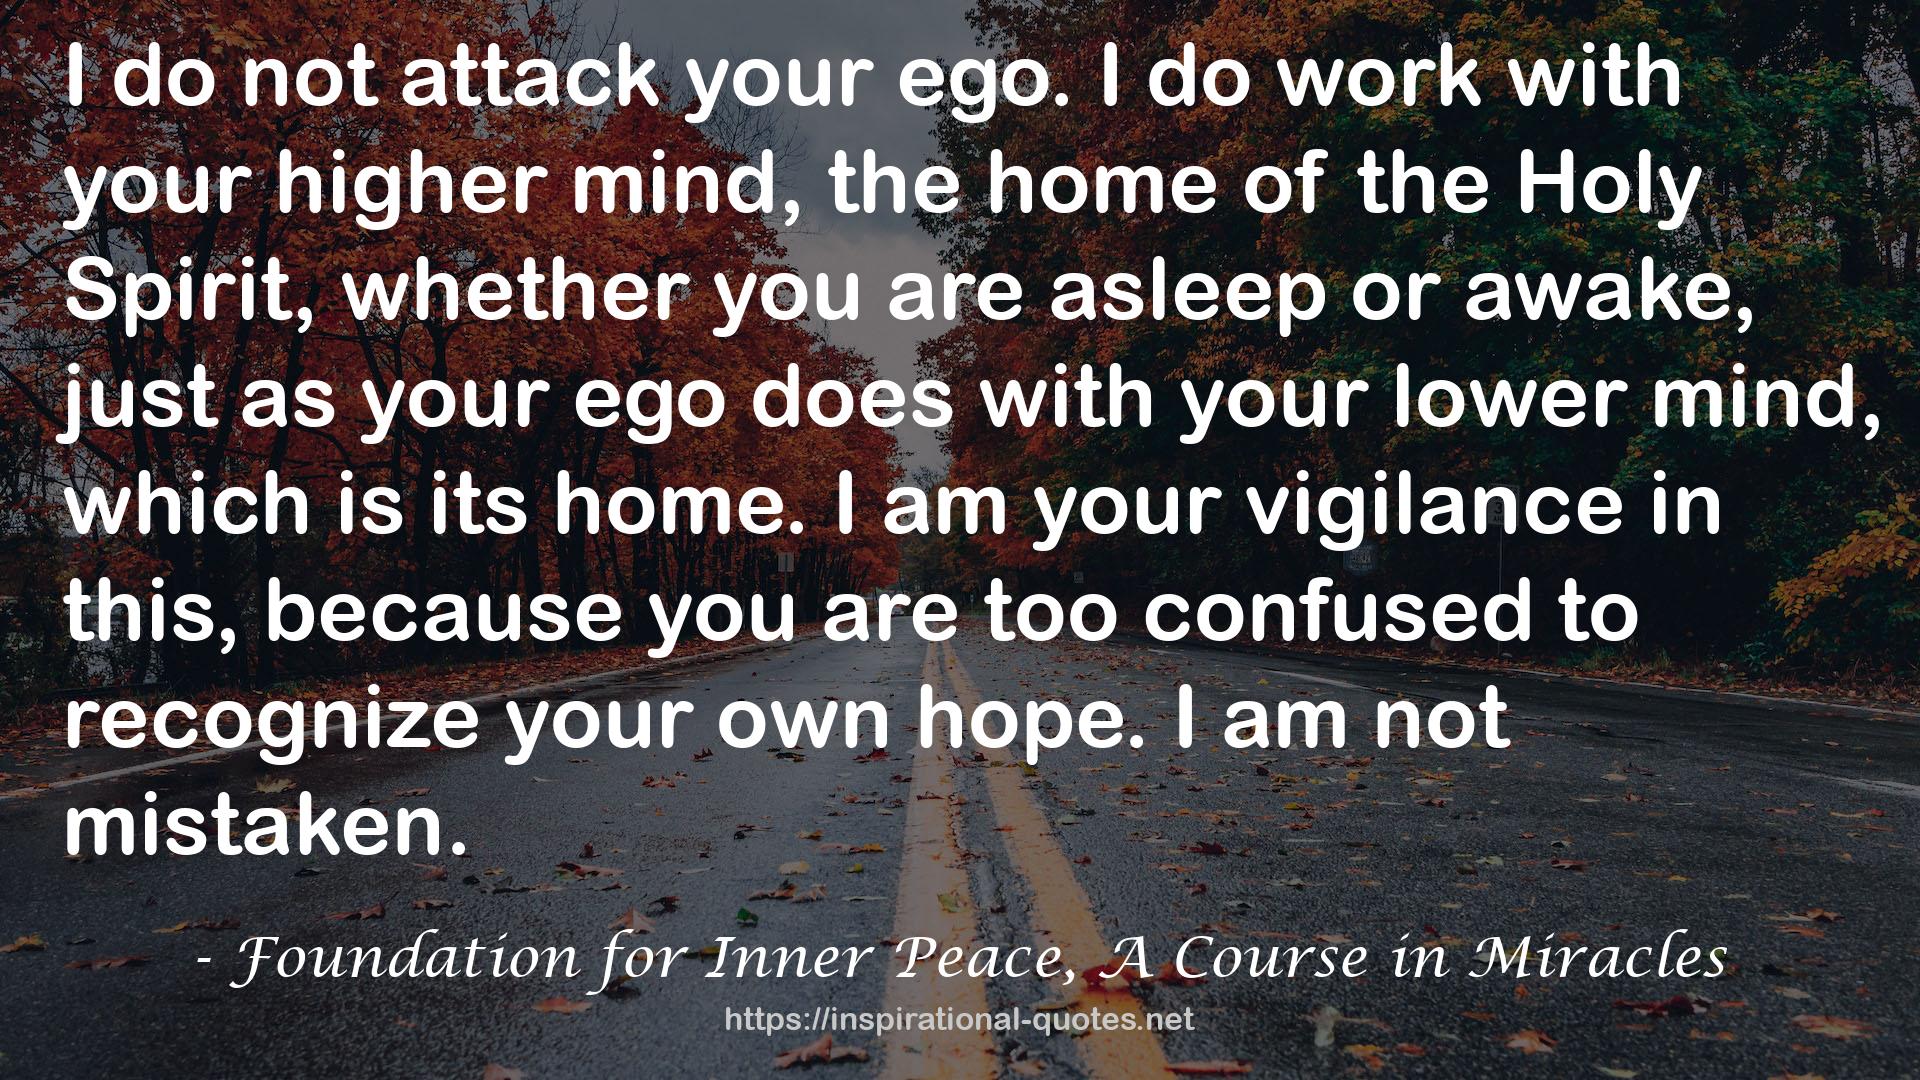 Foundation for Inner Peace, A Course in Miracles QUOTES